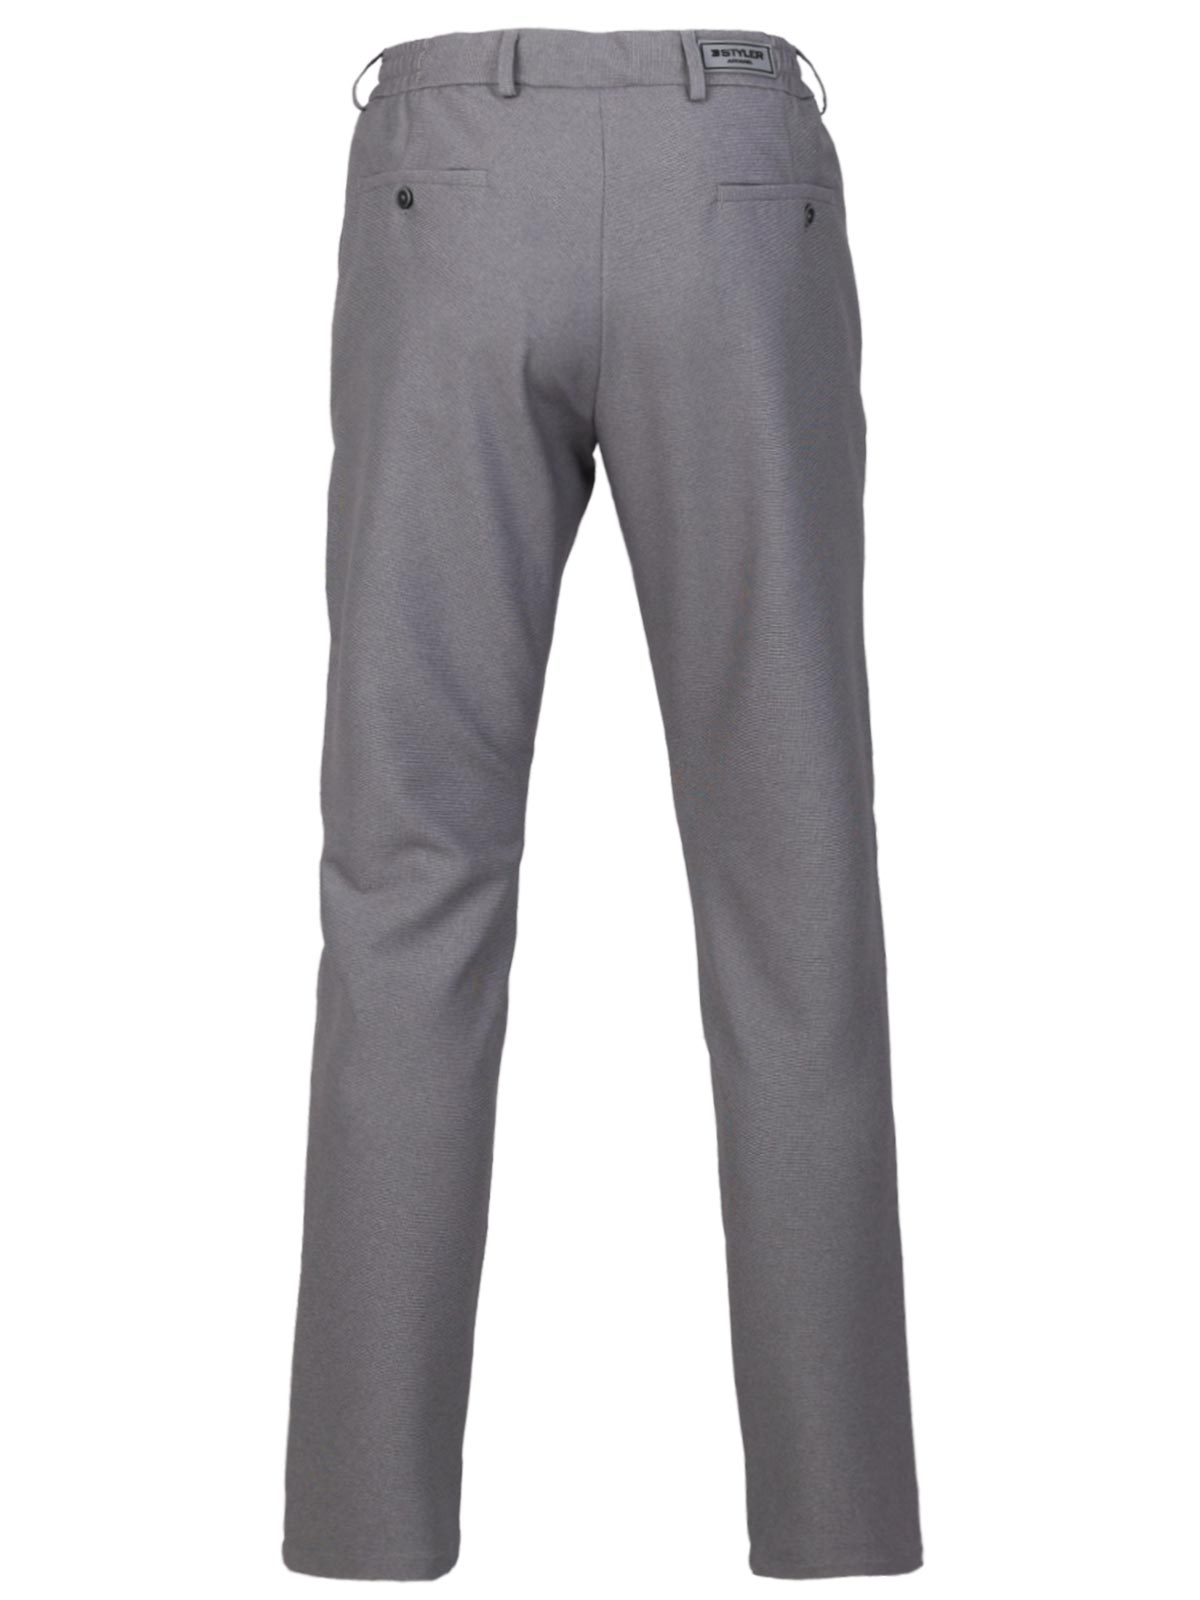 Pants in light gray with laces - 29011 € 55.12 img2